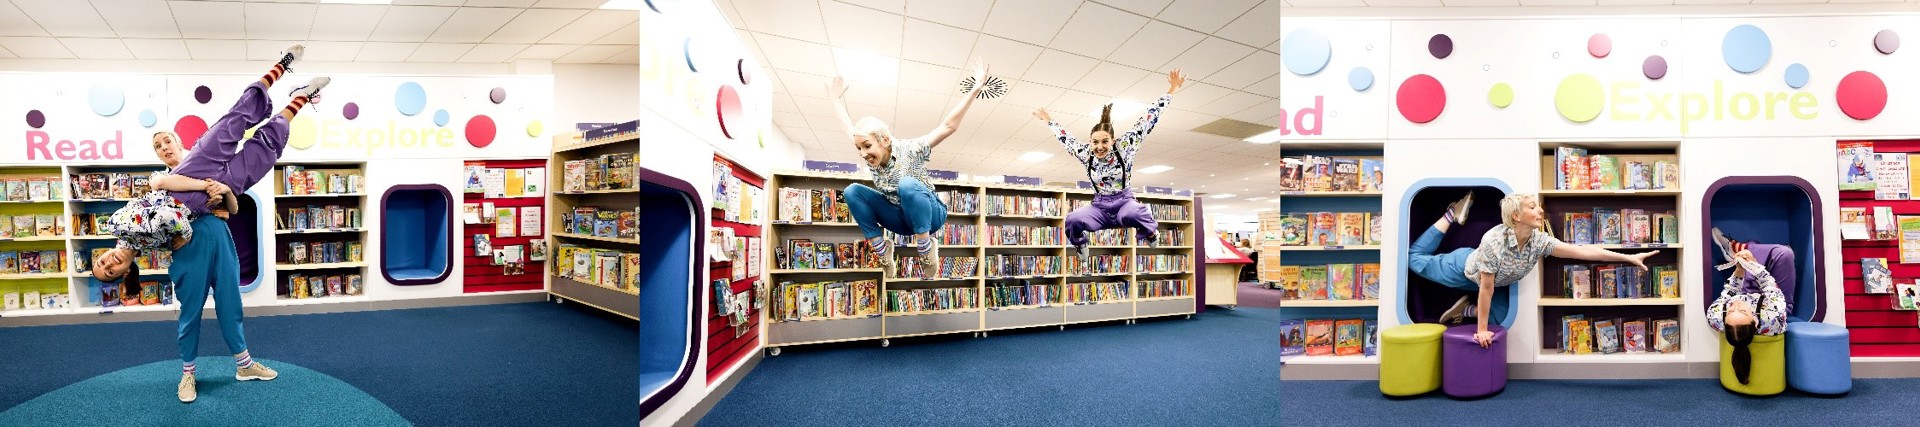 three images of two female dancers jumping and moving in a colourful library 